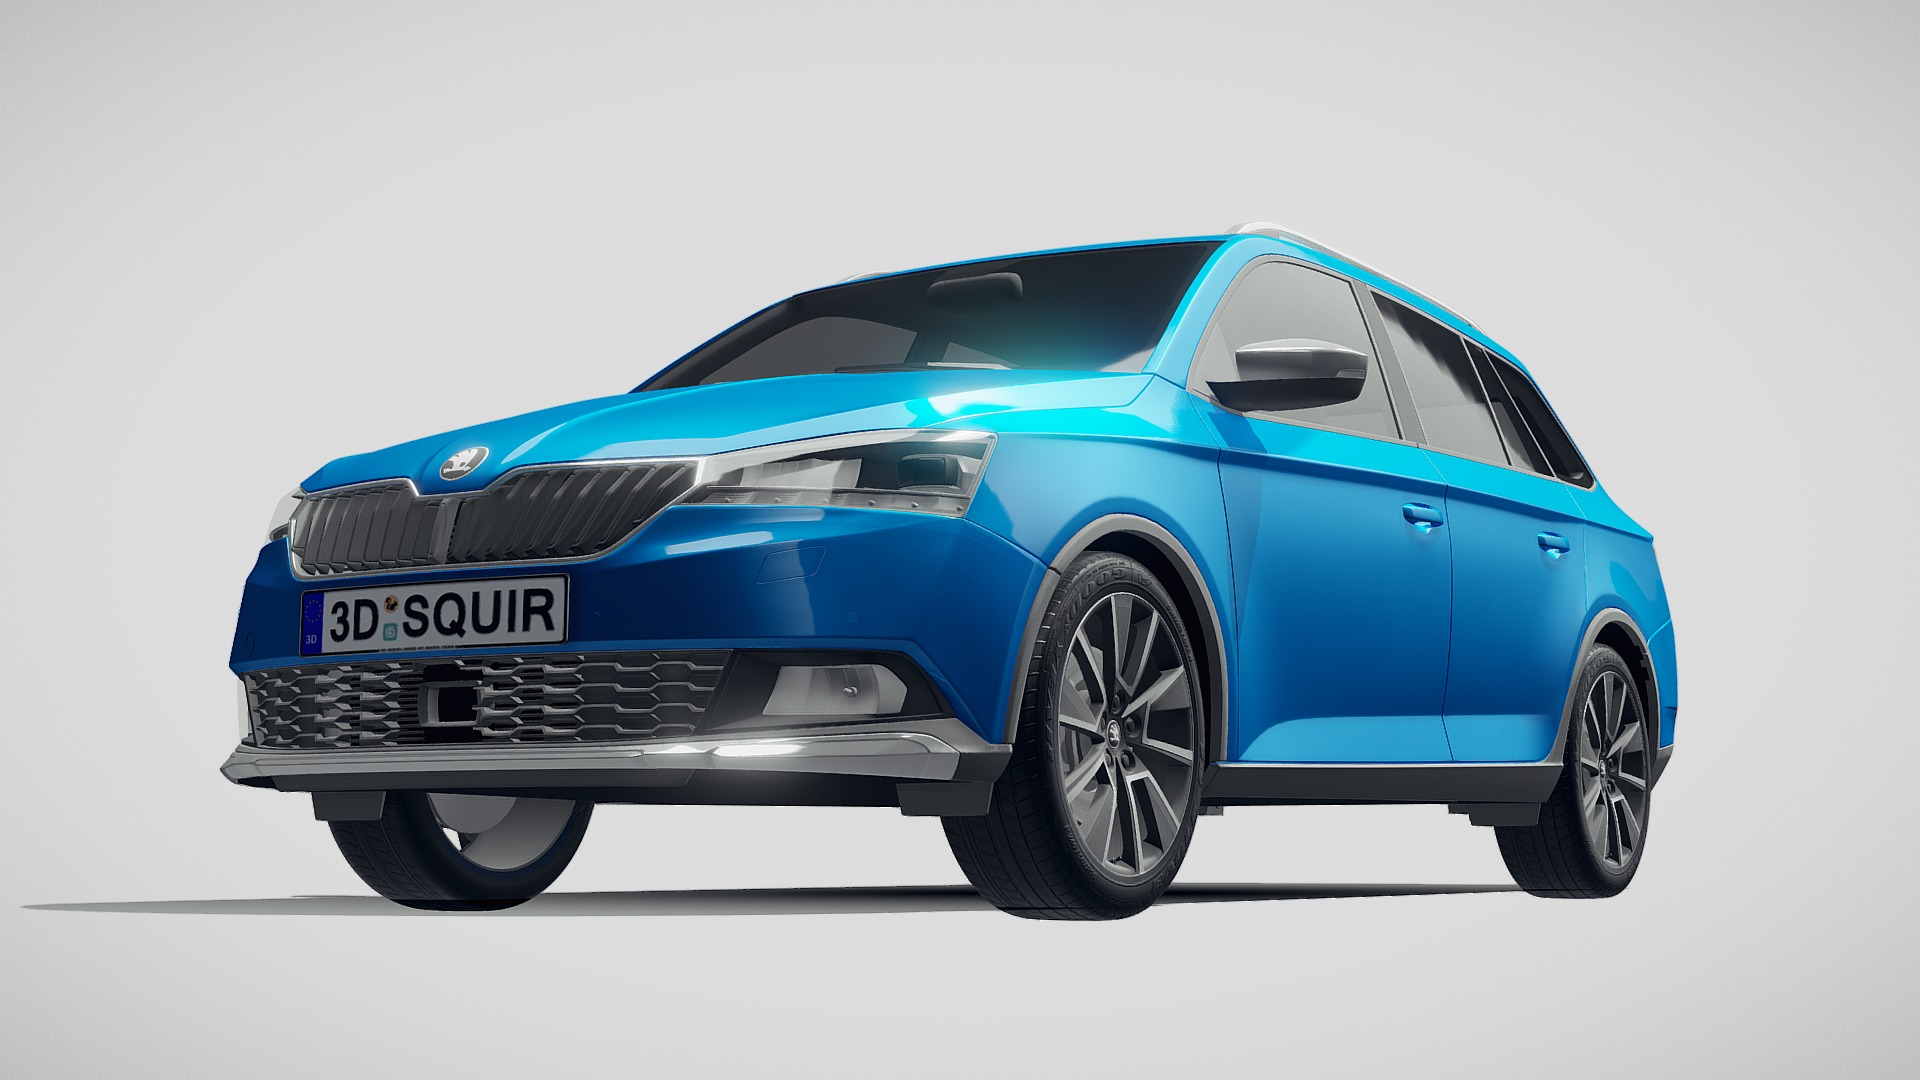 3D model Skoda Fabia Scoutline 2019 - This is a 3D model of the Skoda Fabia Scoutline 2019. The 3D model is about a blue car with a white background.